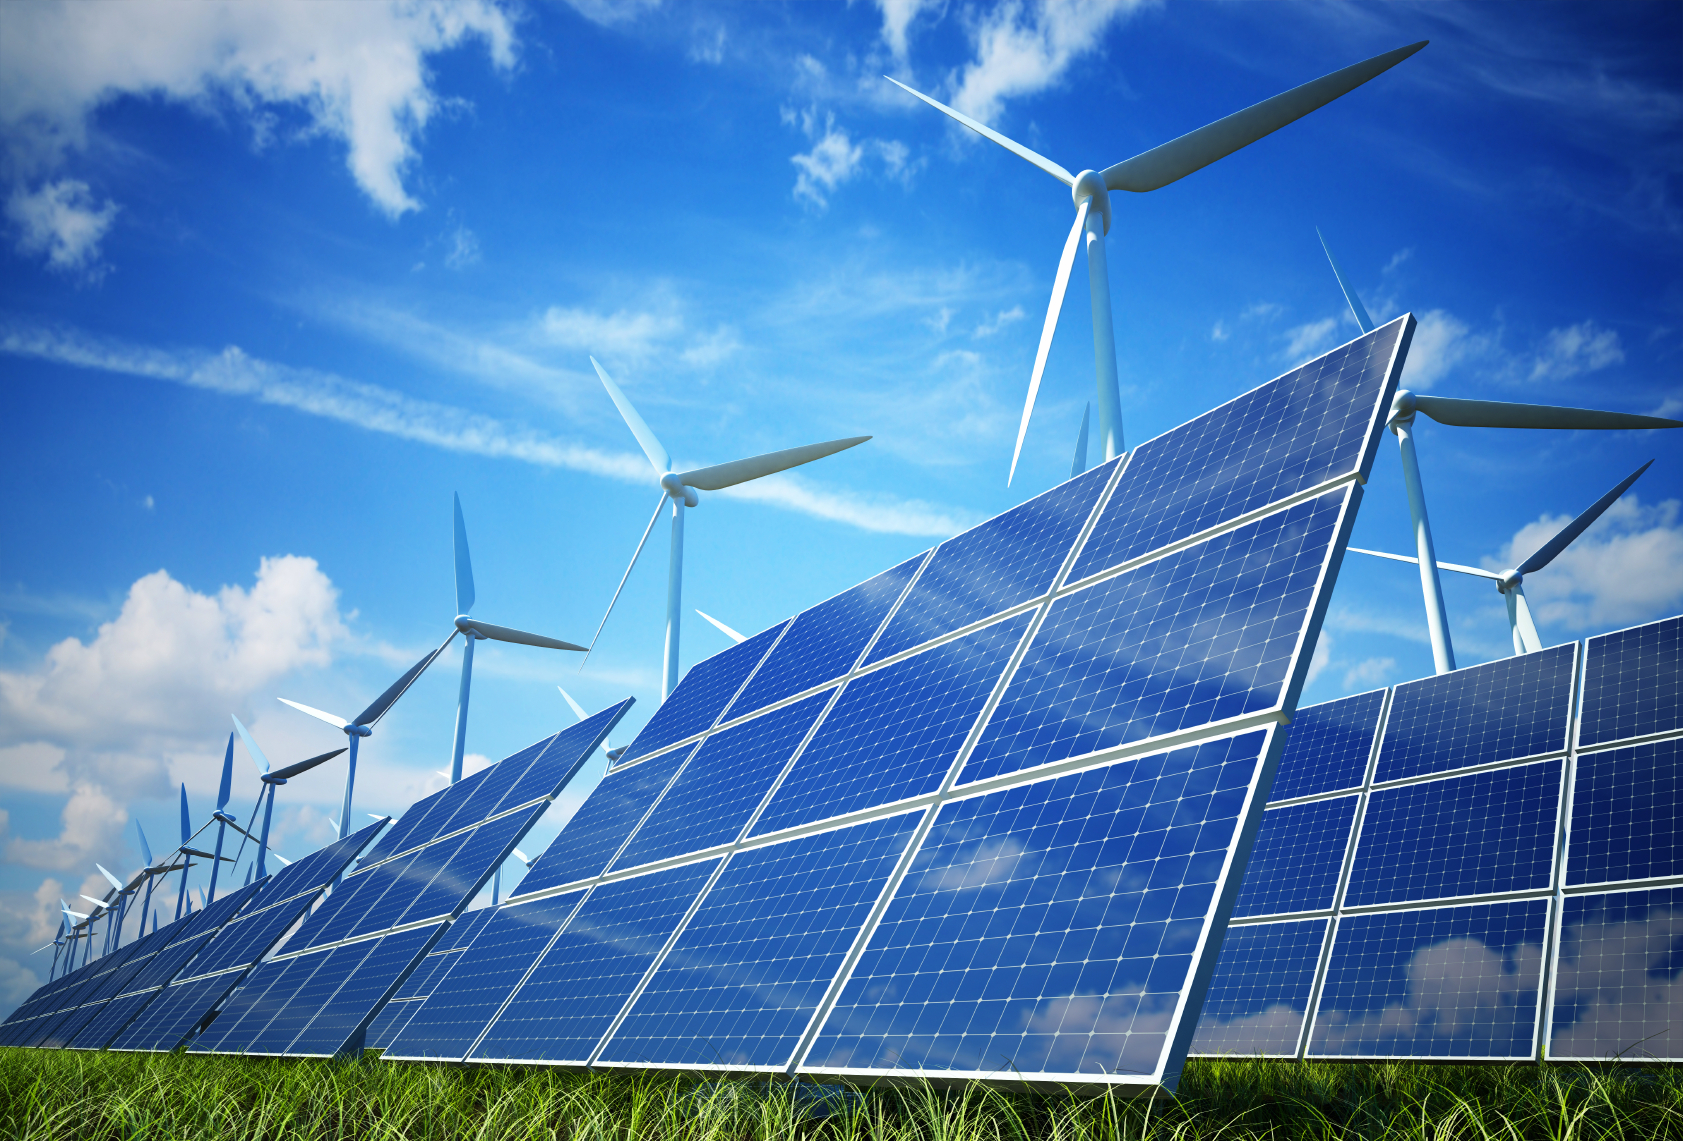 French Development Agency ready to provide financial support for renewables